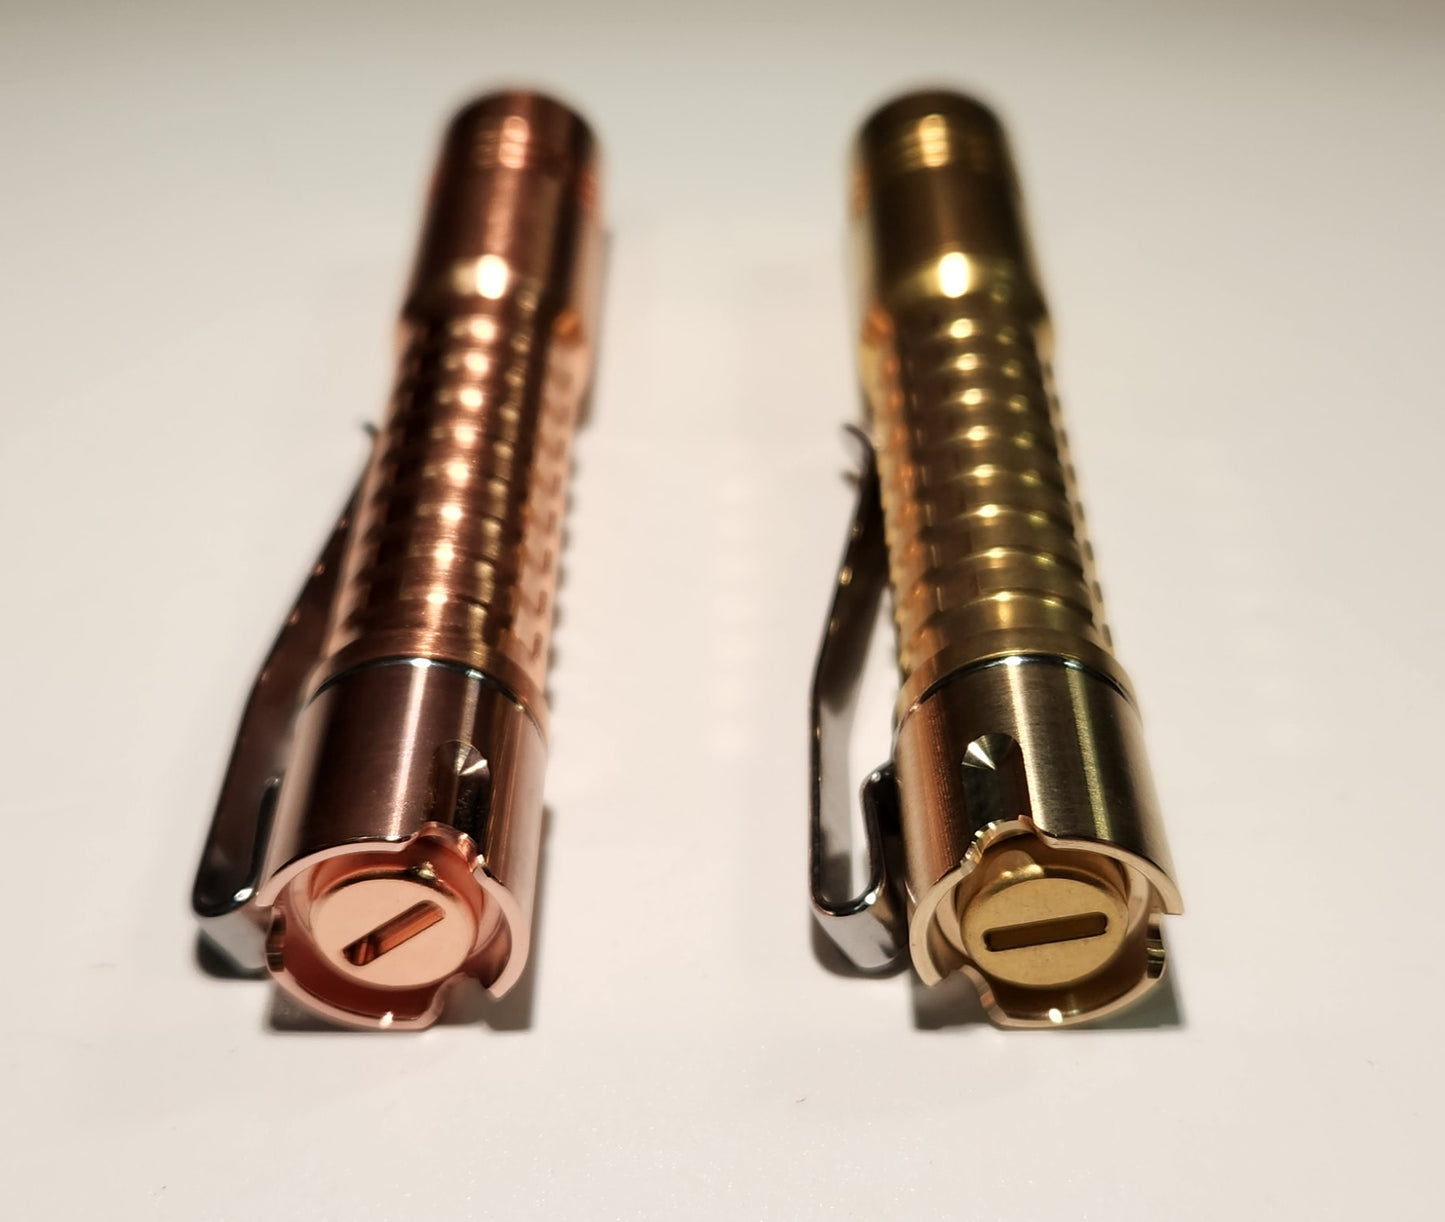 Reylight Pineapple Mini Titanium Copper or Brass *** NEW TAIL CAP ONLY ***